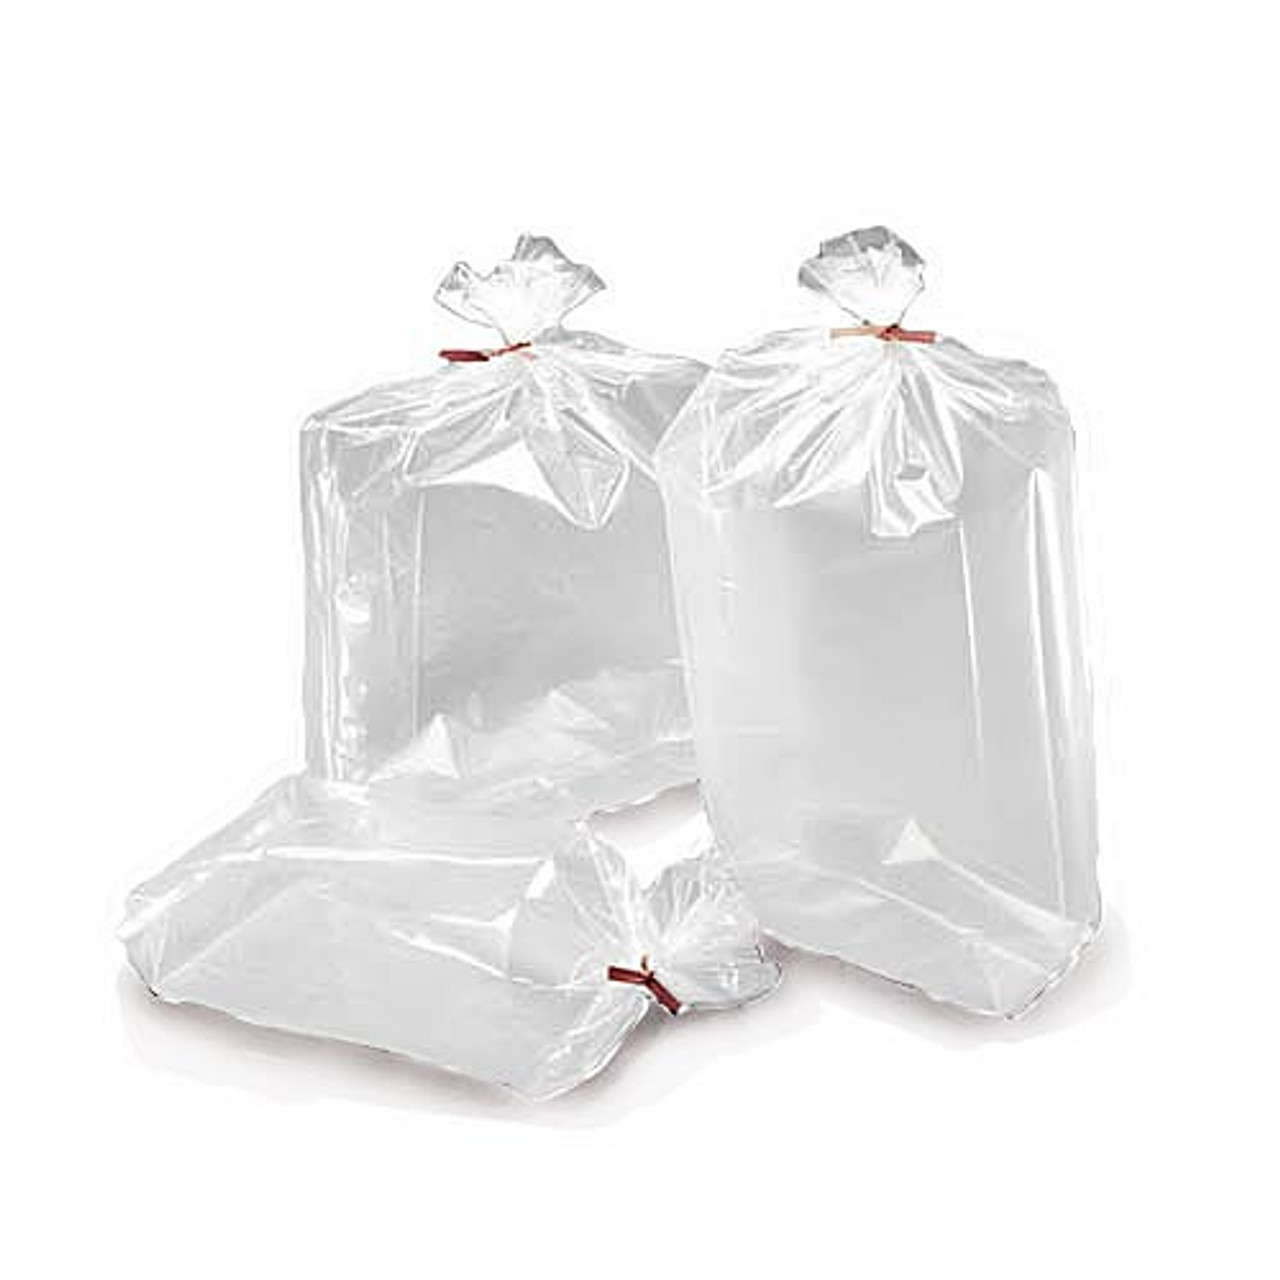 Seed Mix Sterilizing or Humidity Bags 10  2 mil 10x8x24 Gusseted P   The Rusted Garden